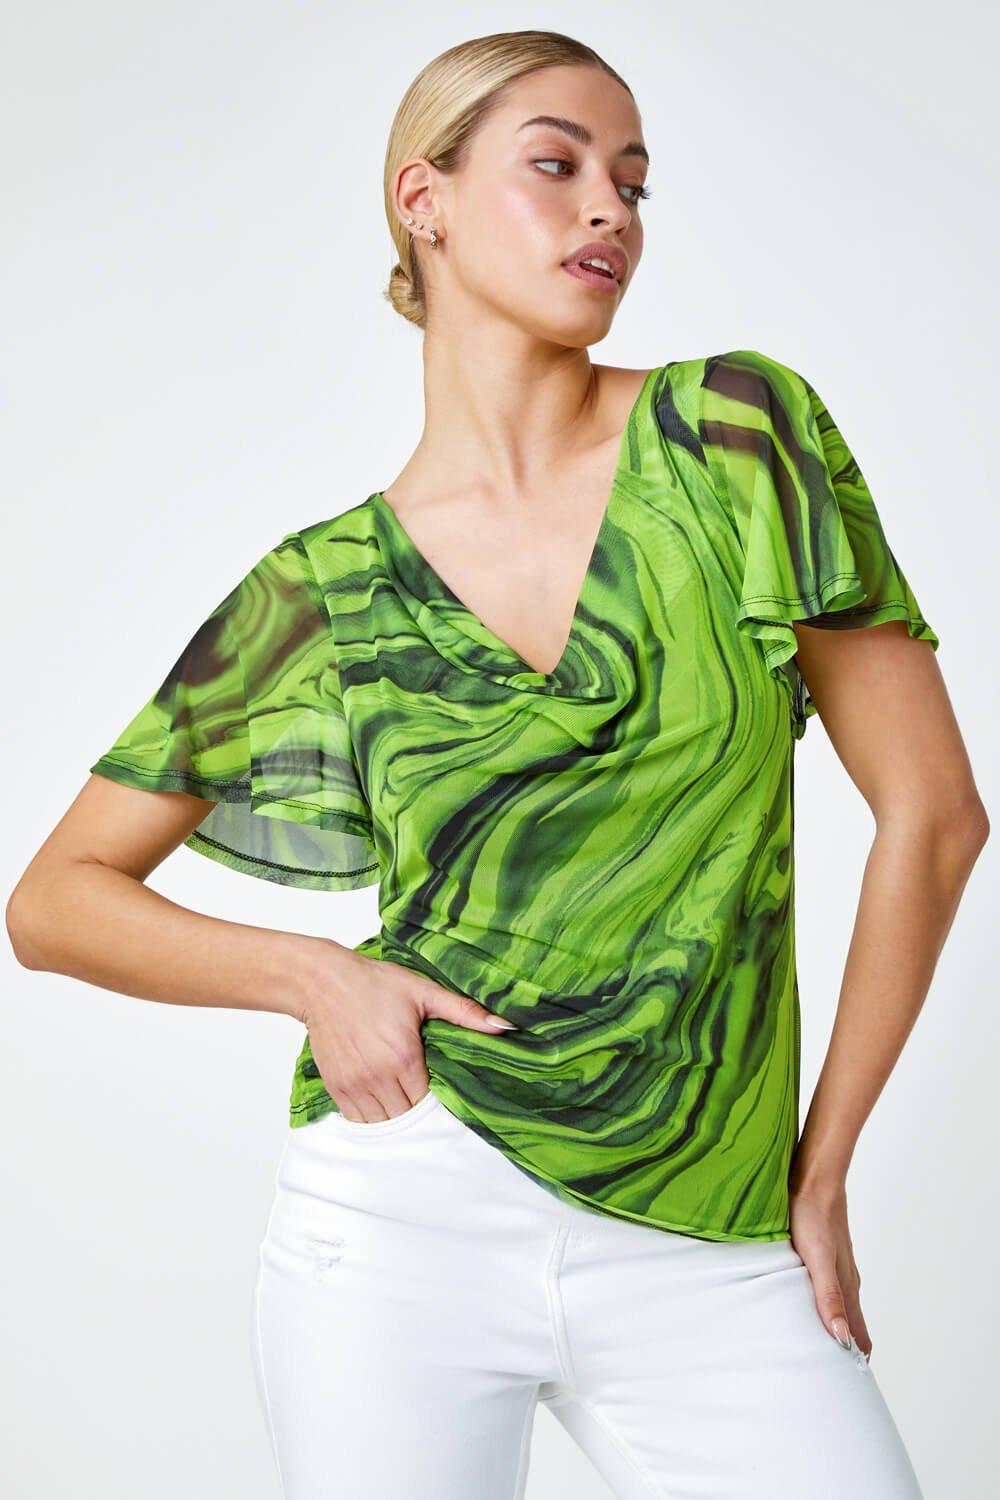 Green Swirl Print Stretch Cut Out Top, Image 2 of 5